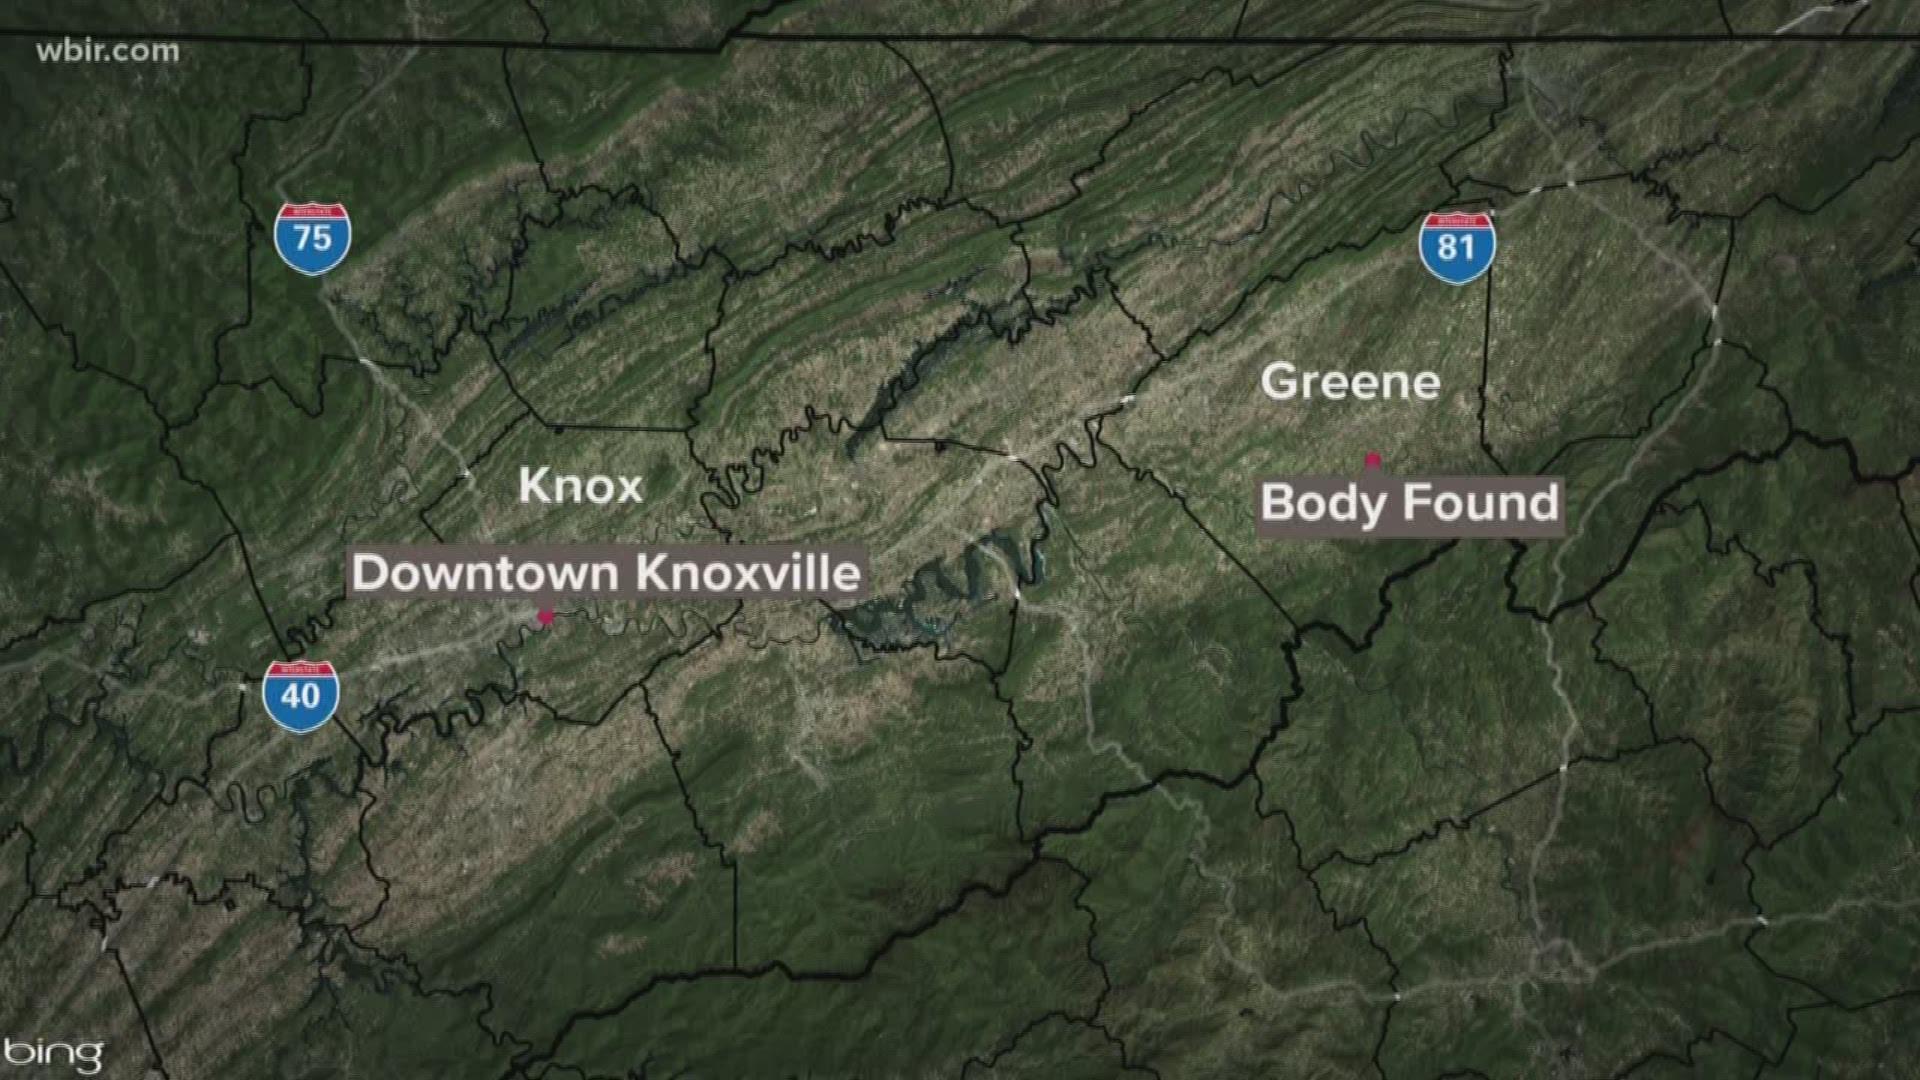 The Greene County Sheriff's Office said the body of 56-year-old Keith D. McNeely was found Sunday around 1:30 p.m.